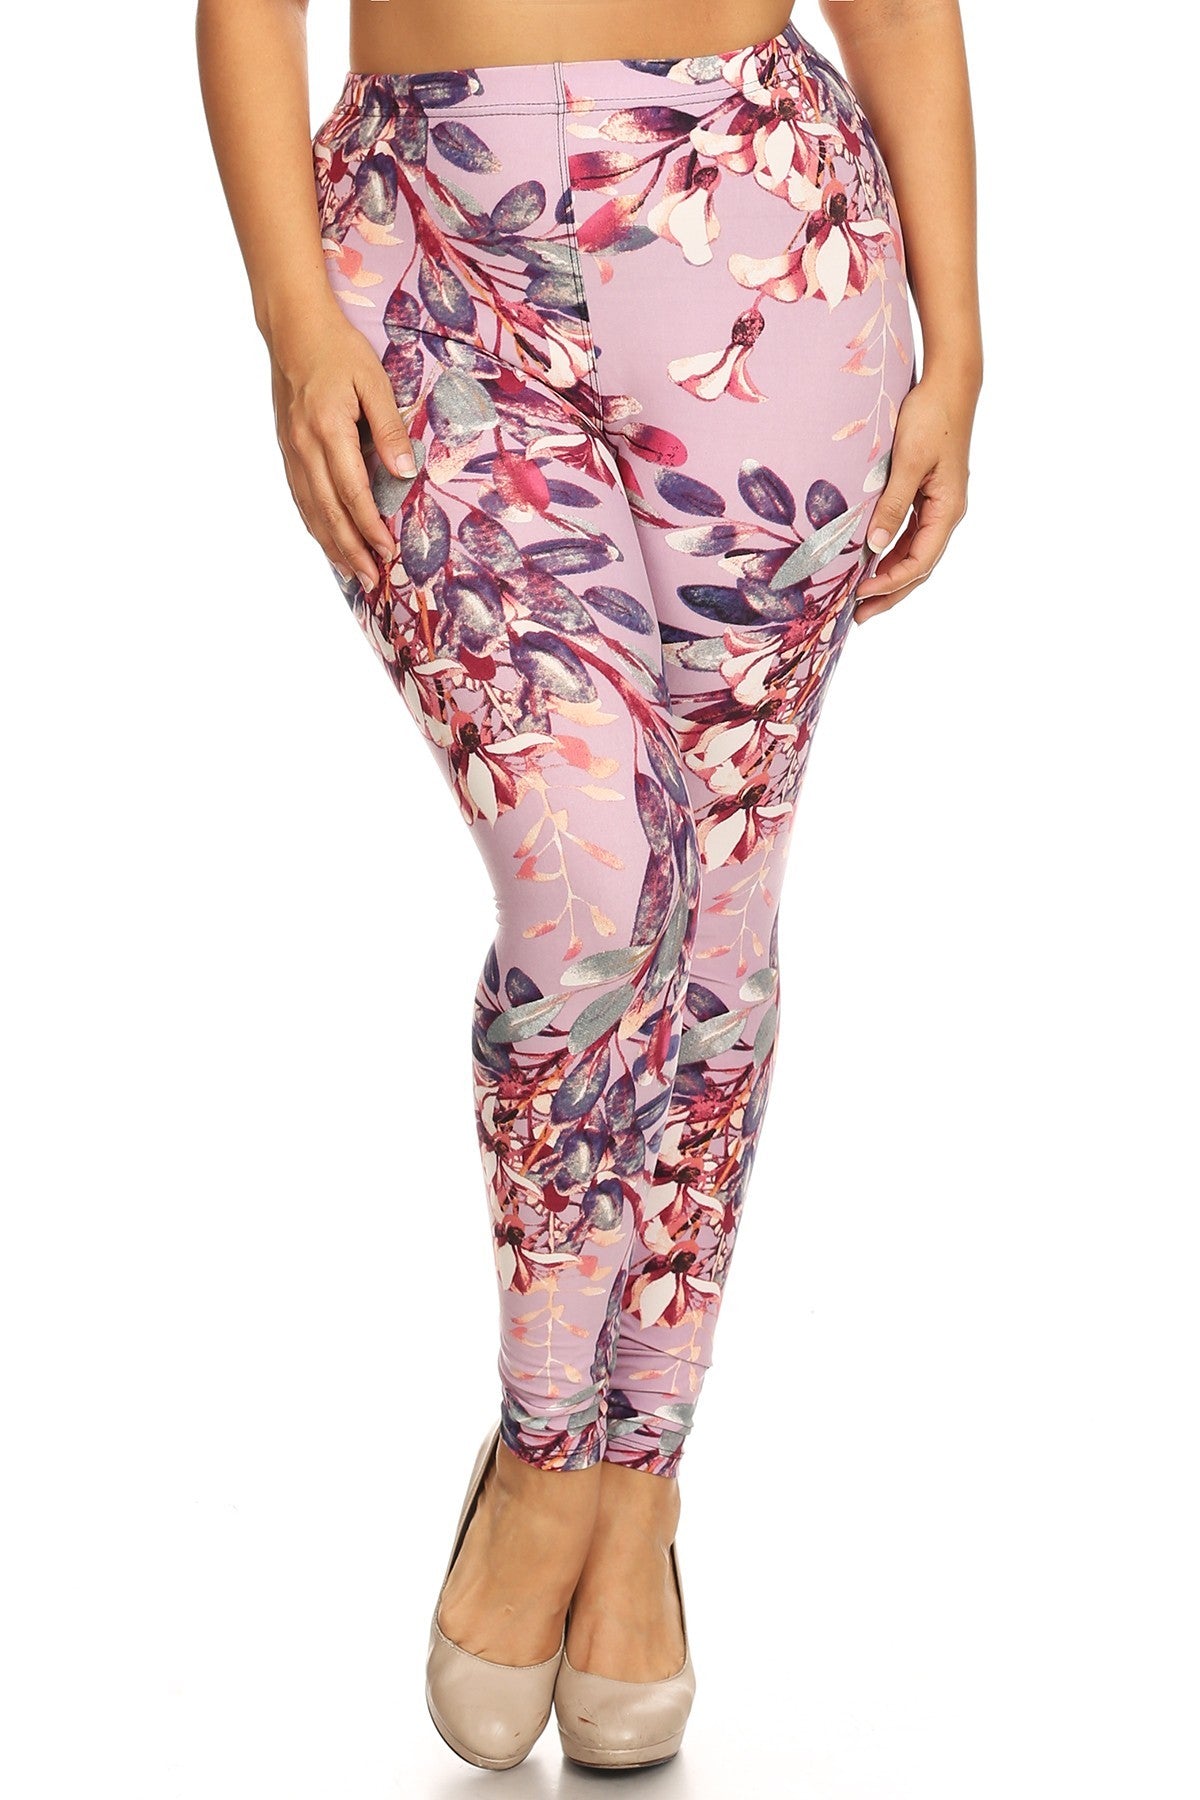 Full Length Leggings In A Slim Fitting Style With A Banded High Waist